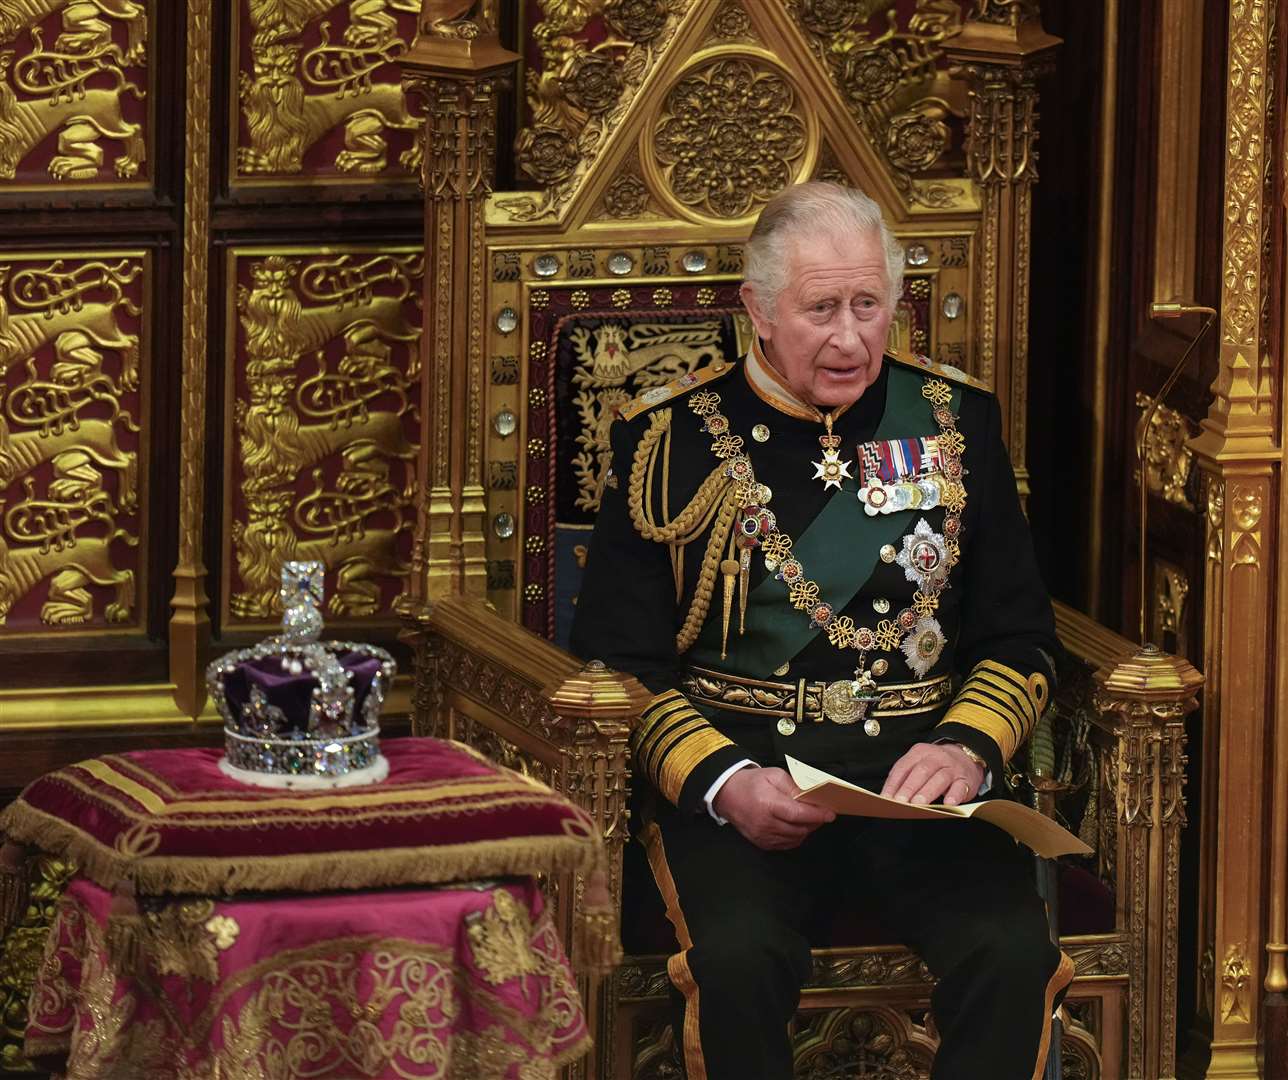 The Prince of Wales delivers the Queen’s Speech during the State Opening of Parliament (Alastair Grant/PA)